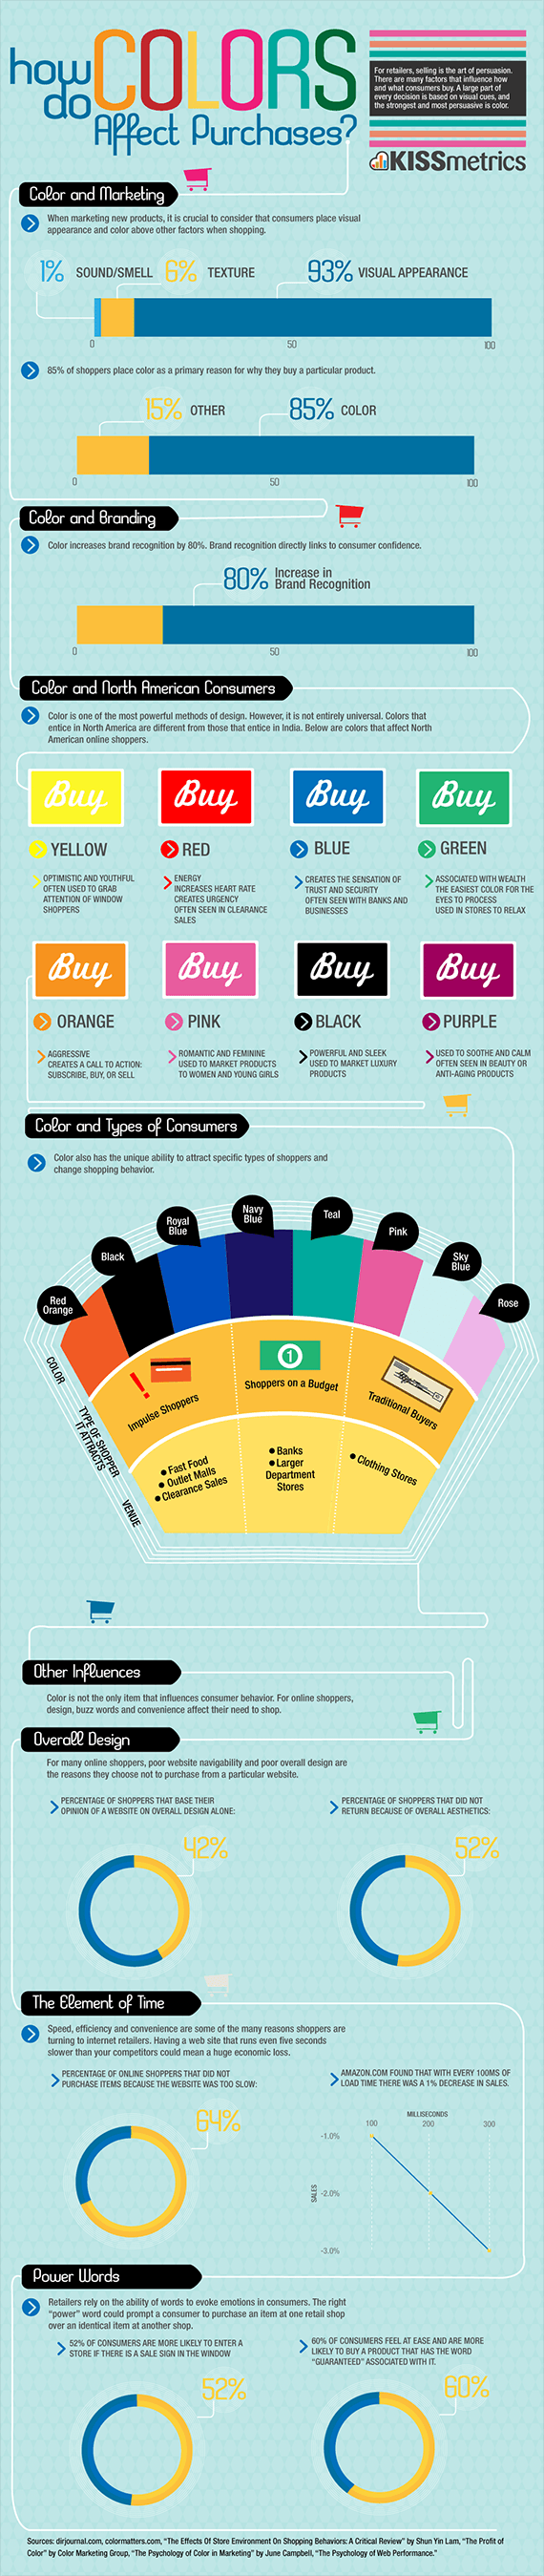 how colors affect purchases infographic